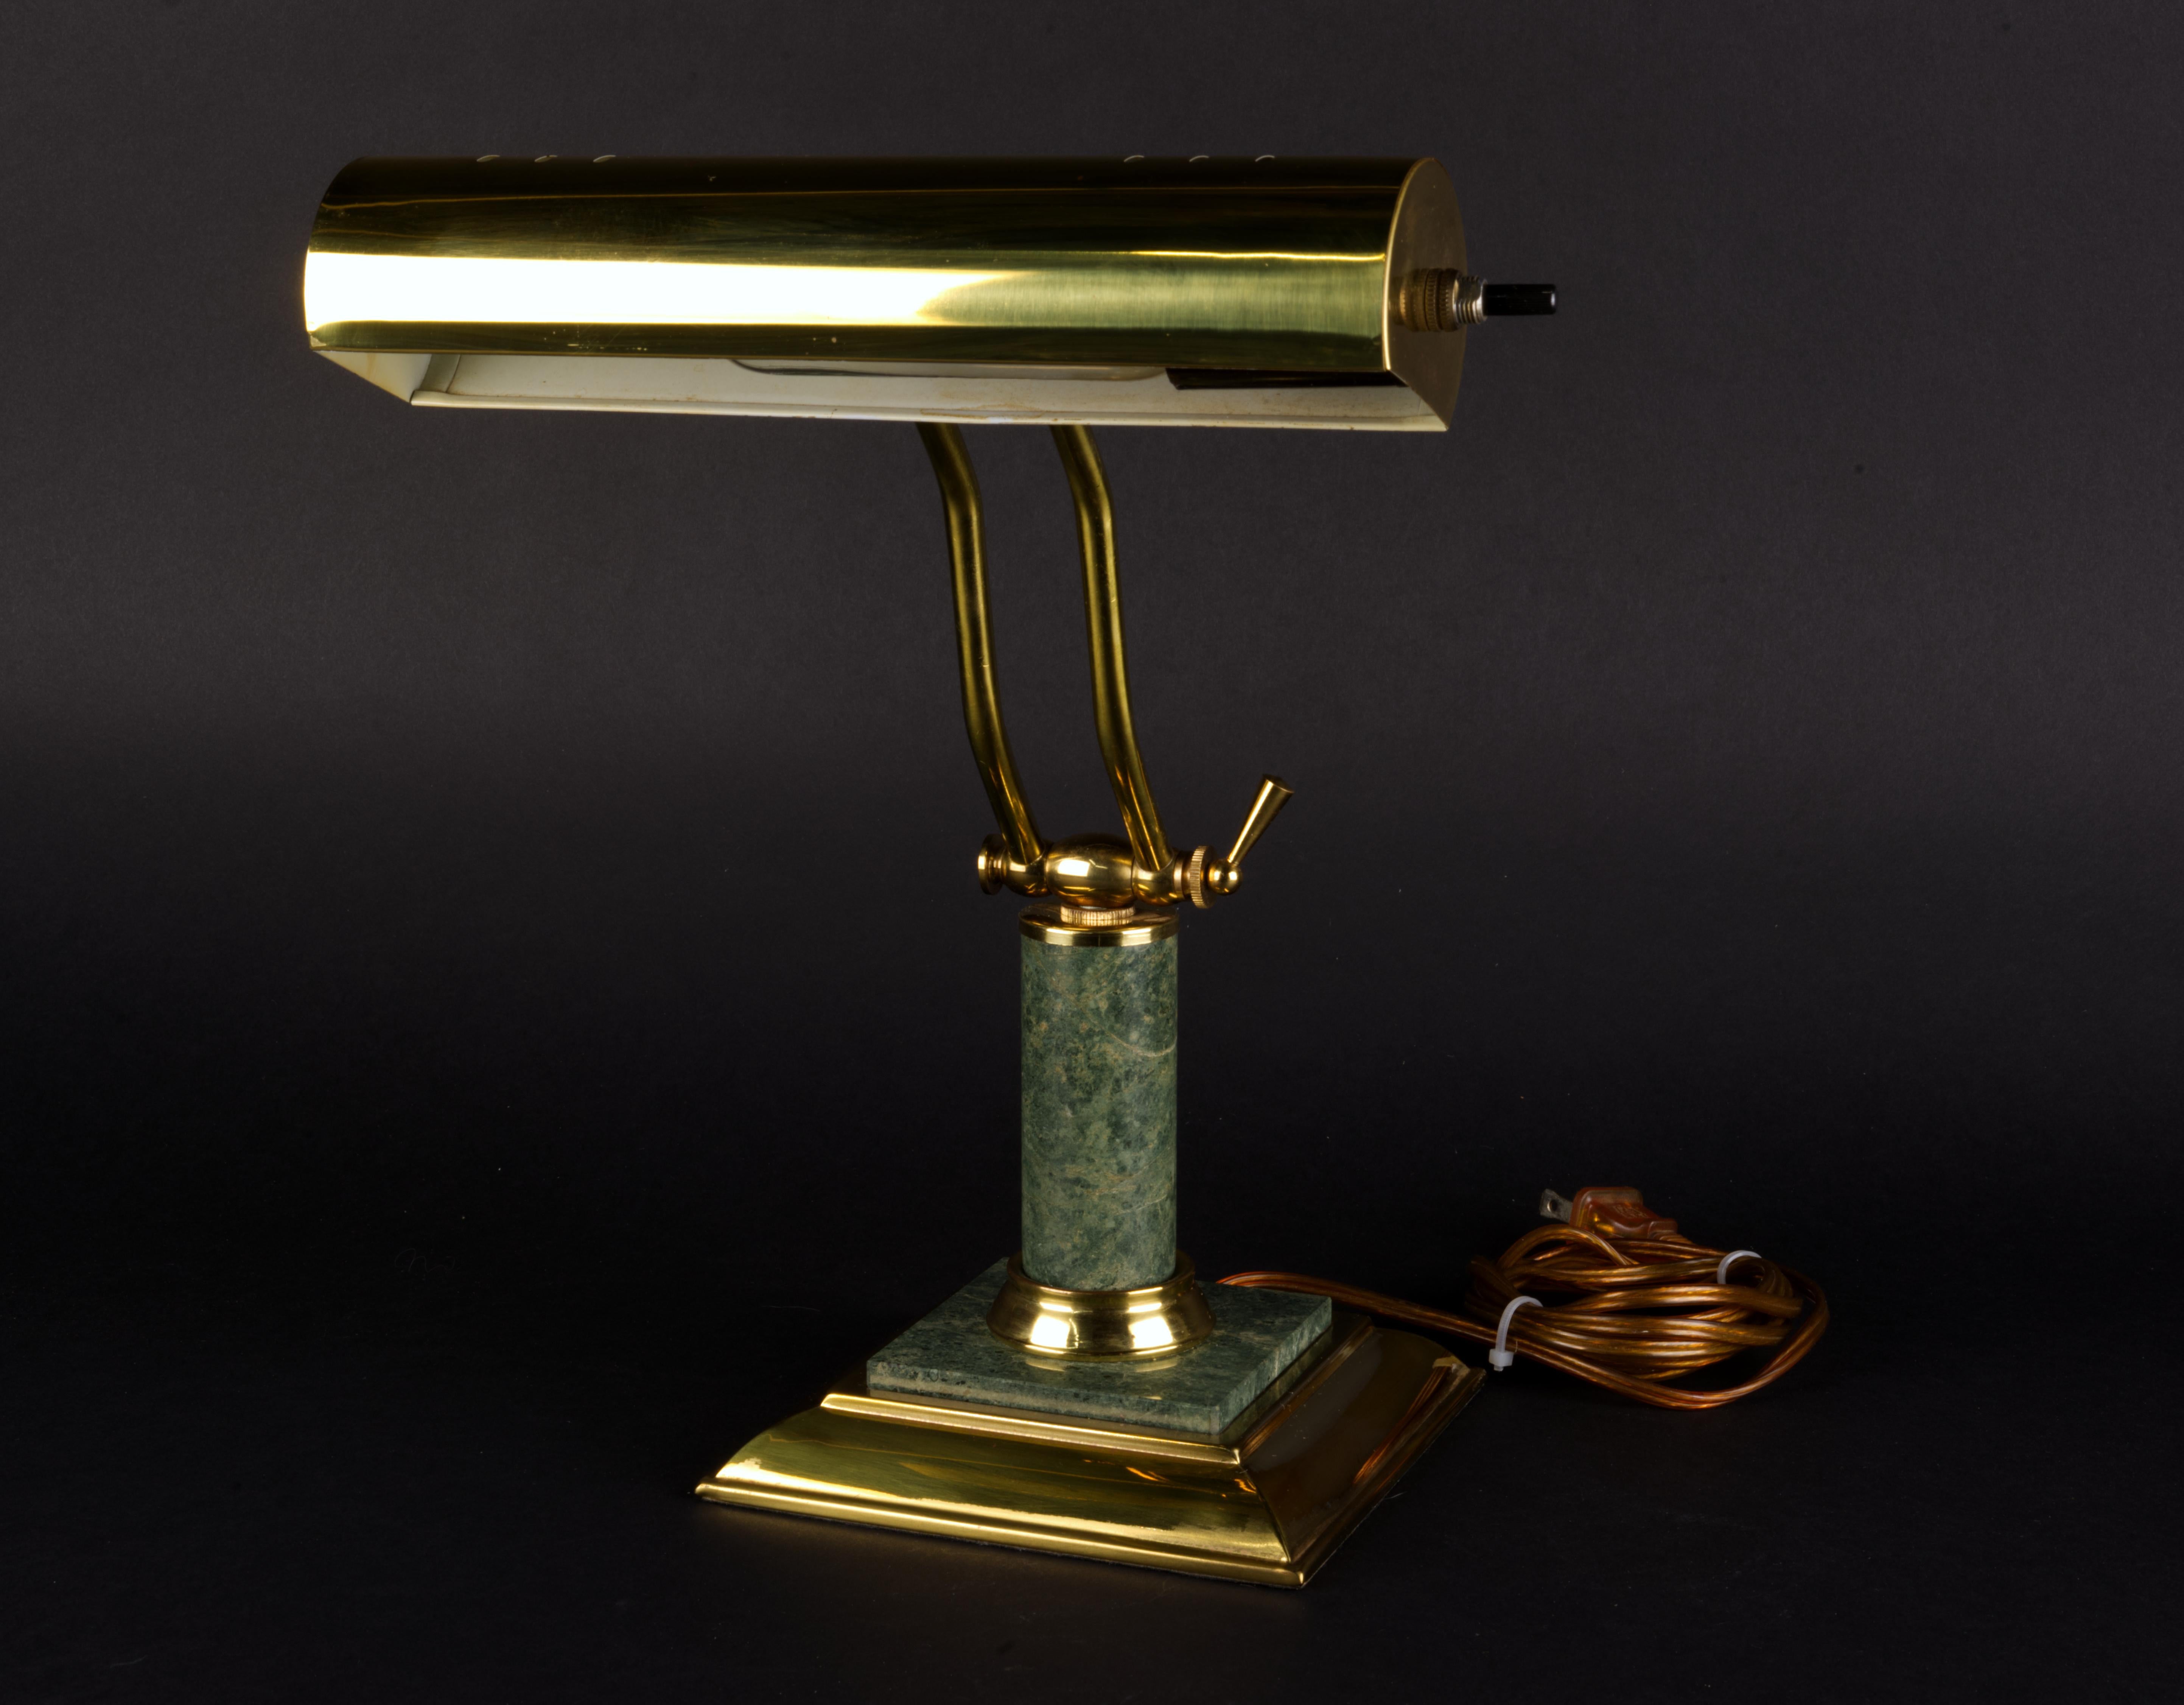 Art Deco revival Bankers Lamp in green marble and brass. 
Brass has a nice patina. Marble is in great condition. The lamp is fully functional. 
This type of the lamp can be used in variety of situations, such as desk, book shelves, piano light, or